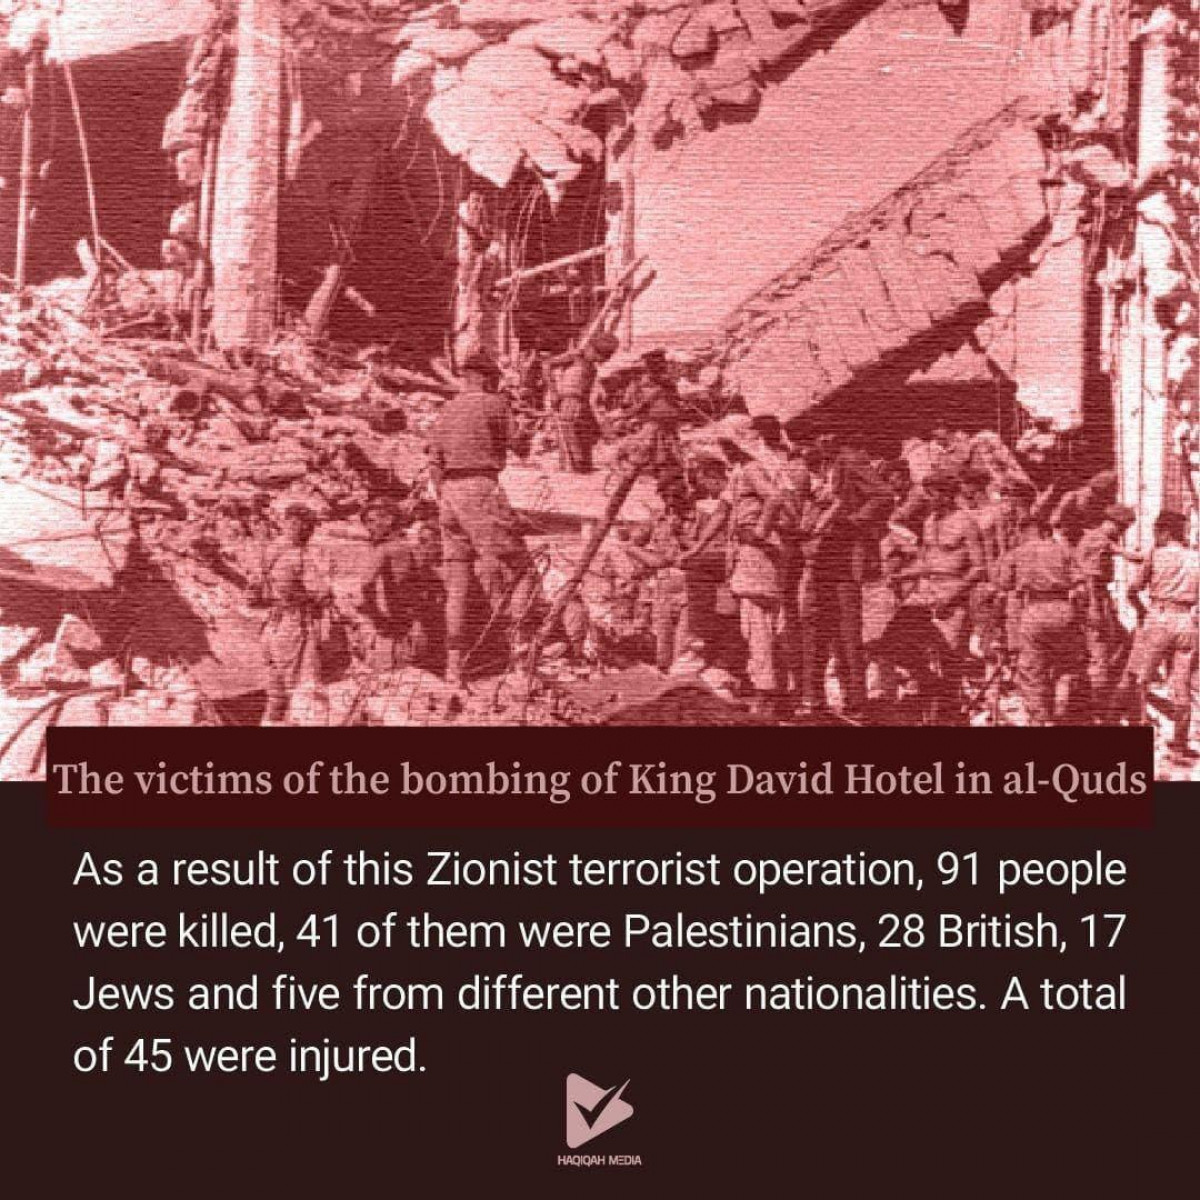 The victims of the bombing of King David Hotel in al-Quds